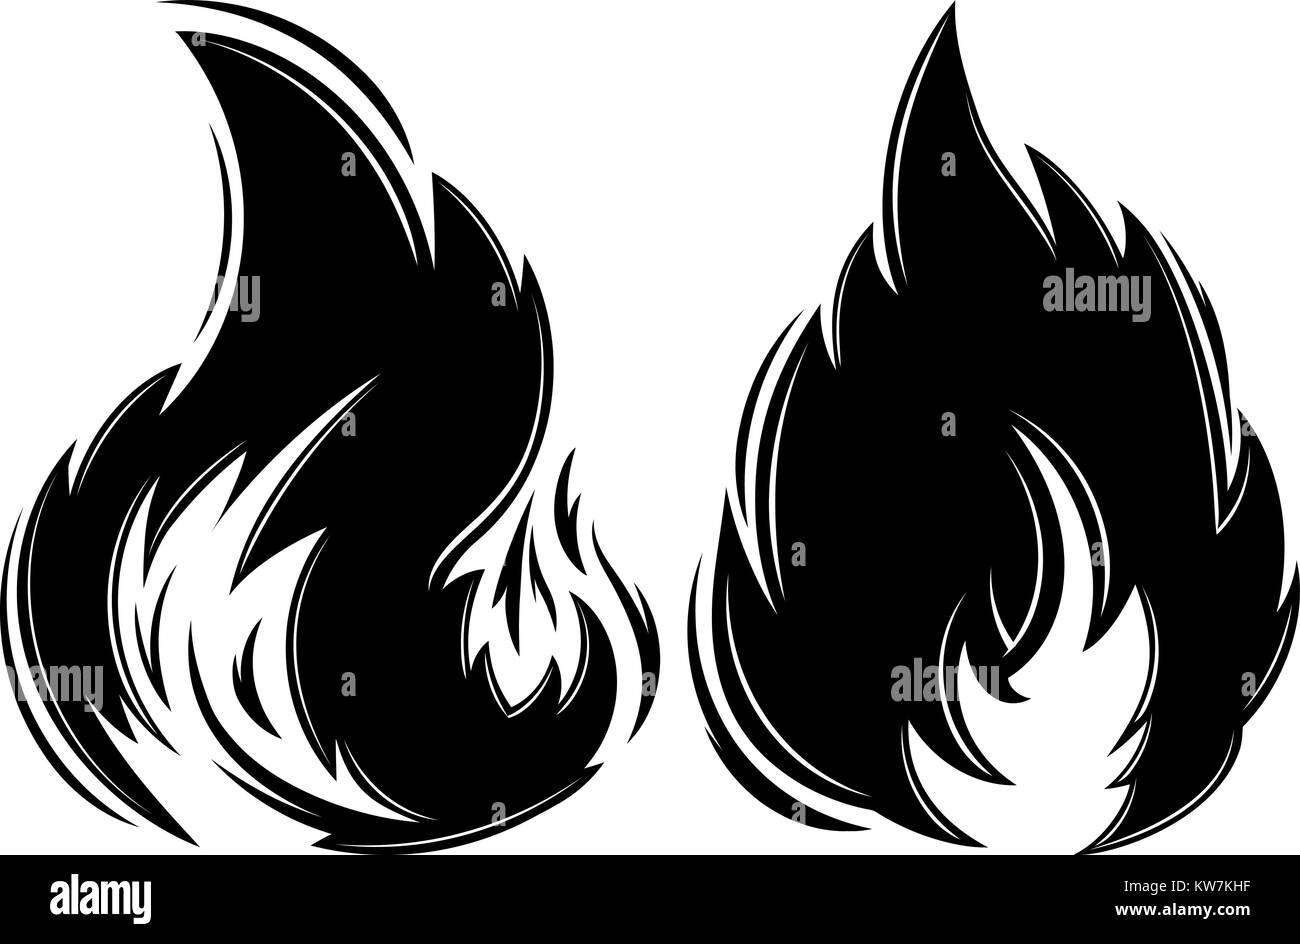 Hot Rod Flame Tattoo Stock Illustrations – 266 Hot Rod Flame Tattoo Stock  Illustrations, Vectors & Clipart - Dreamstime